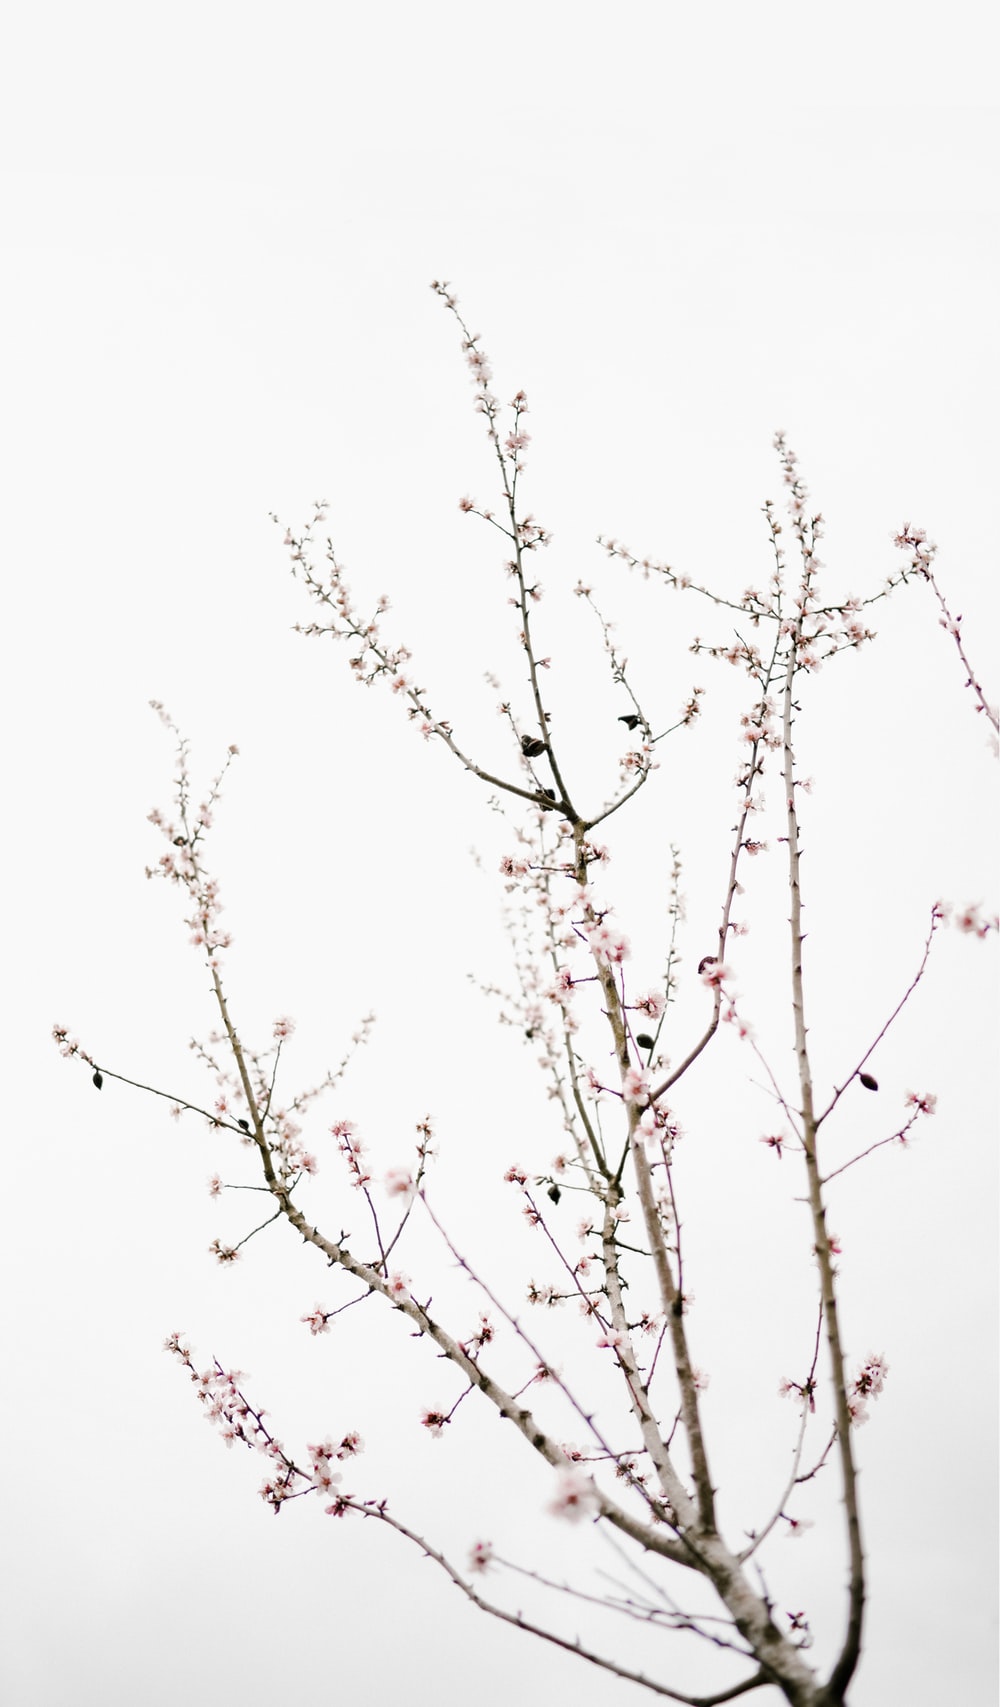 Minimal Flowers Picture. Download Free Image